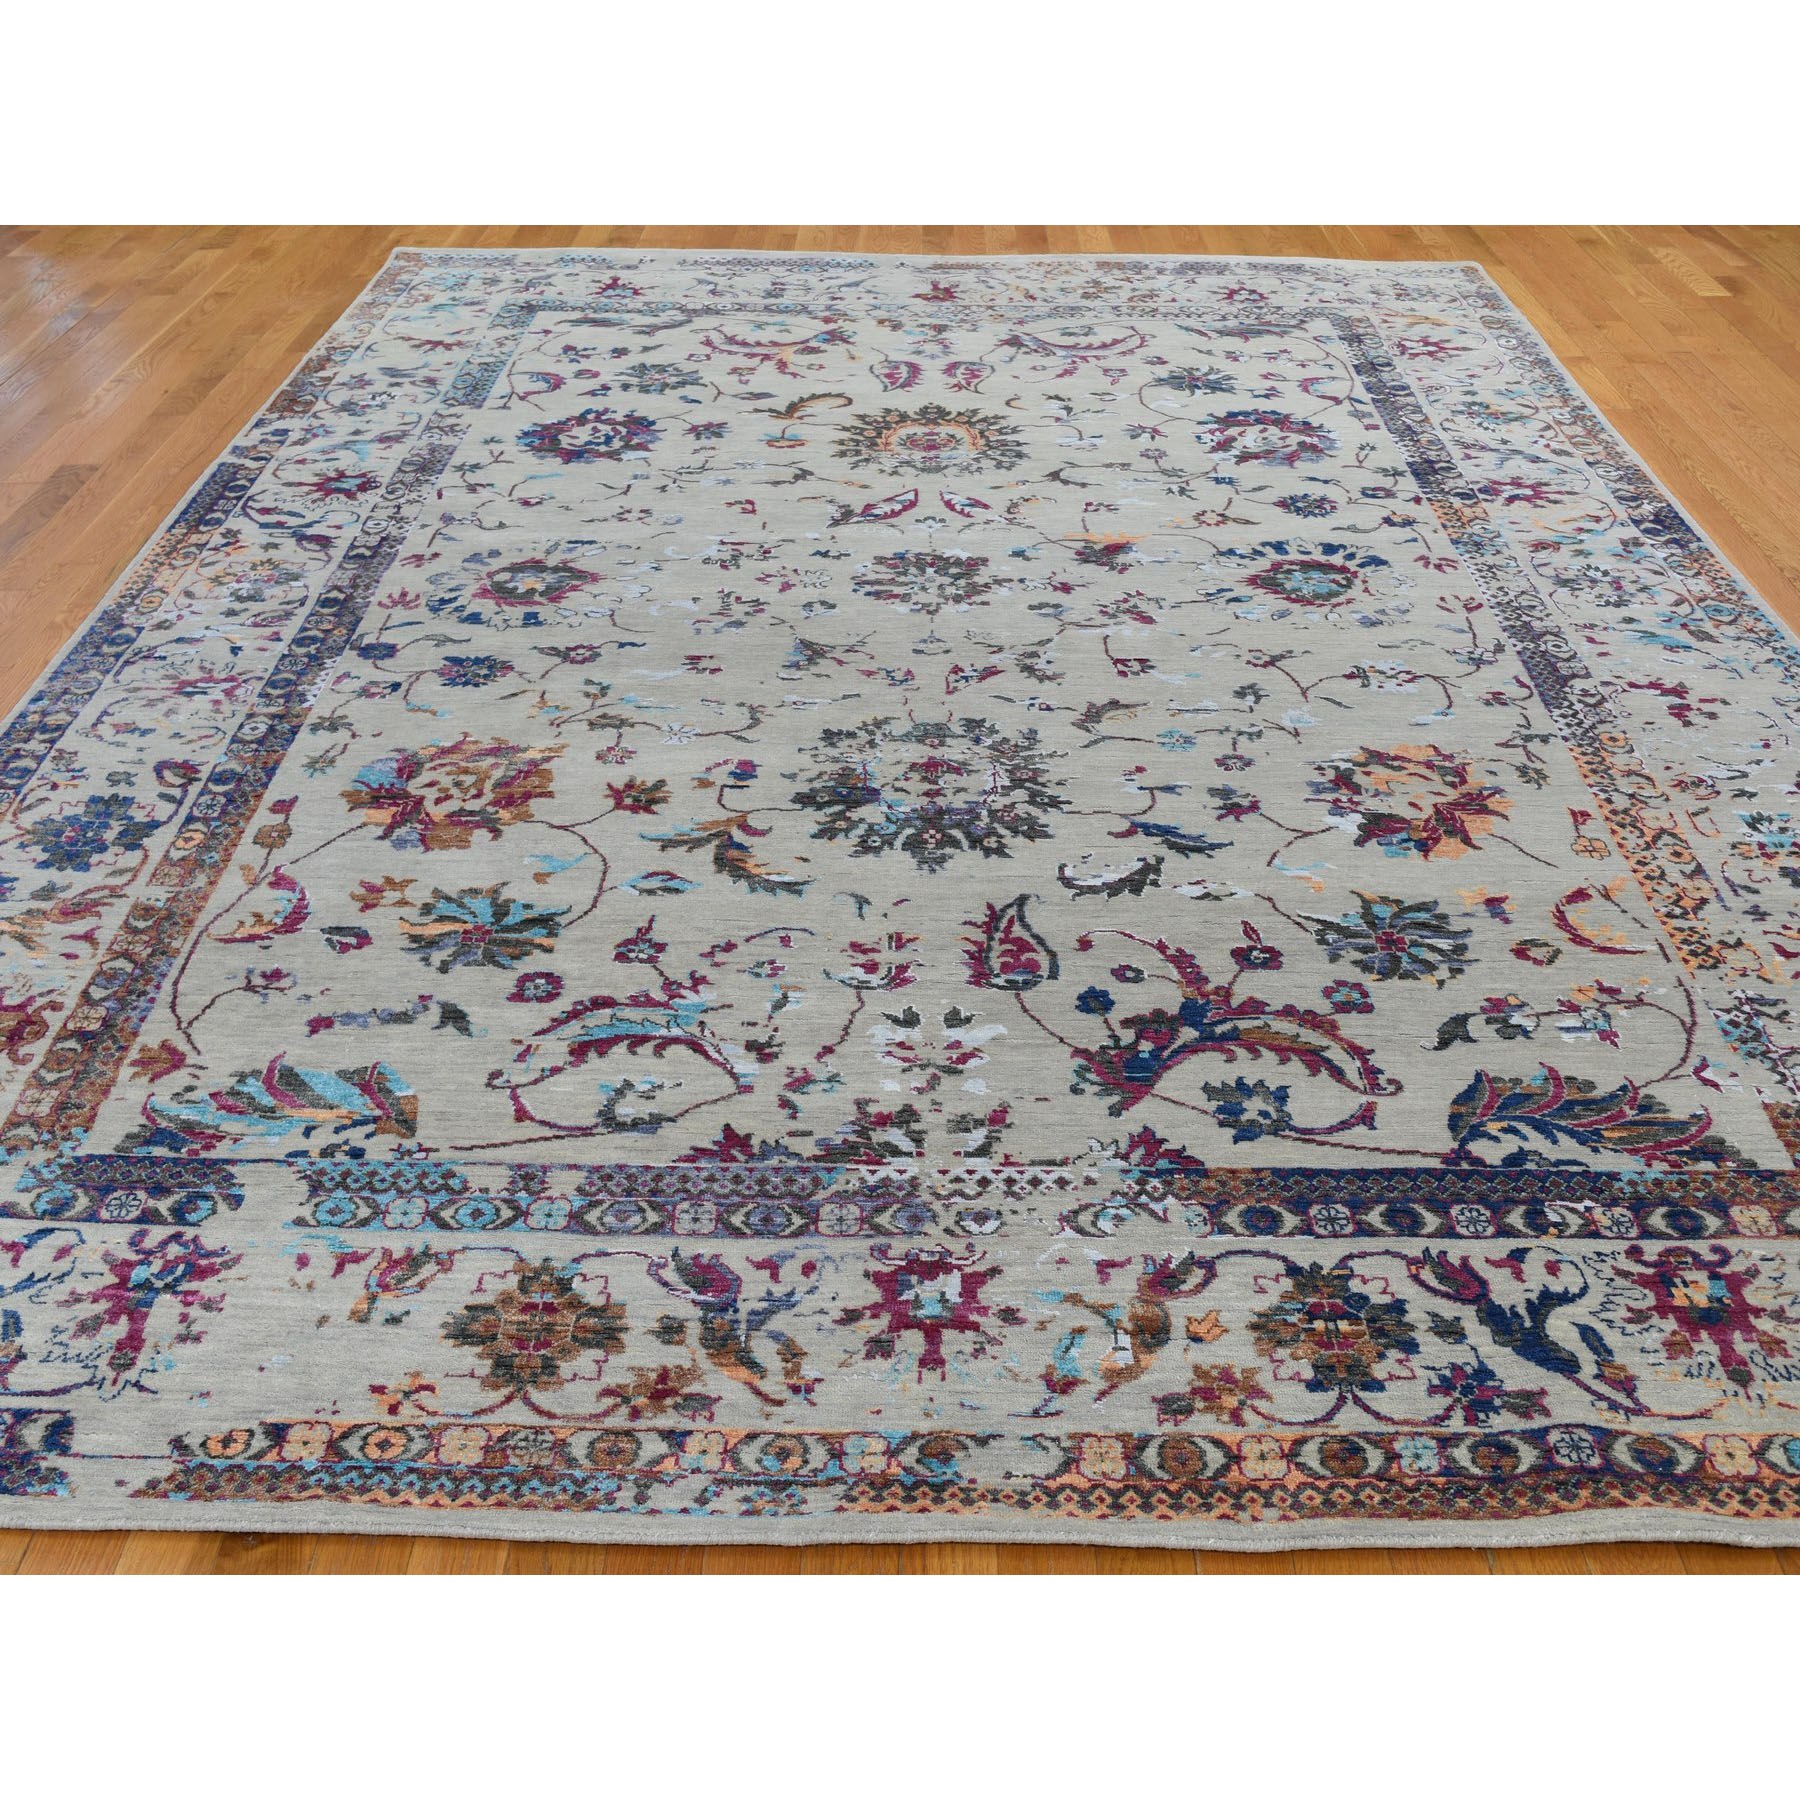 9-1 x12-1  Colorful Wool And Silk Erased Persian Design Hand Knotted Oriental Rug 